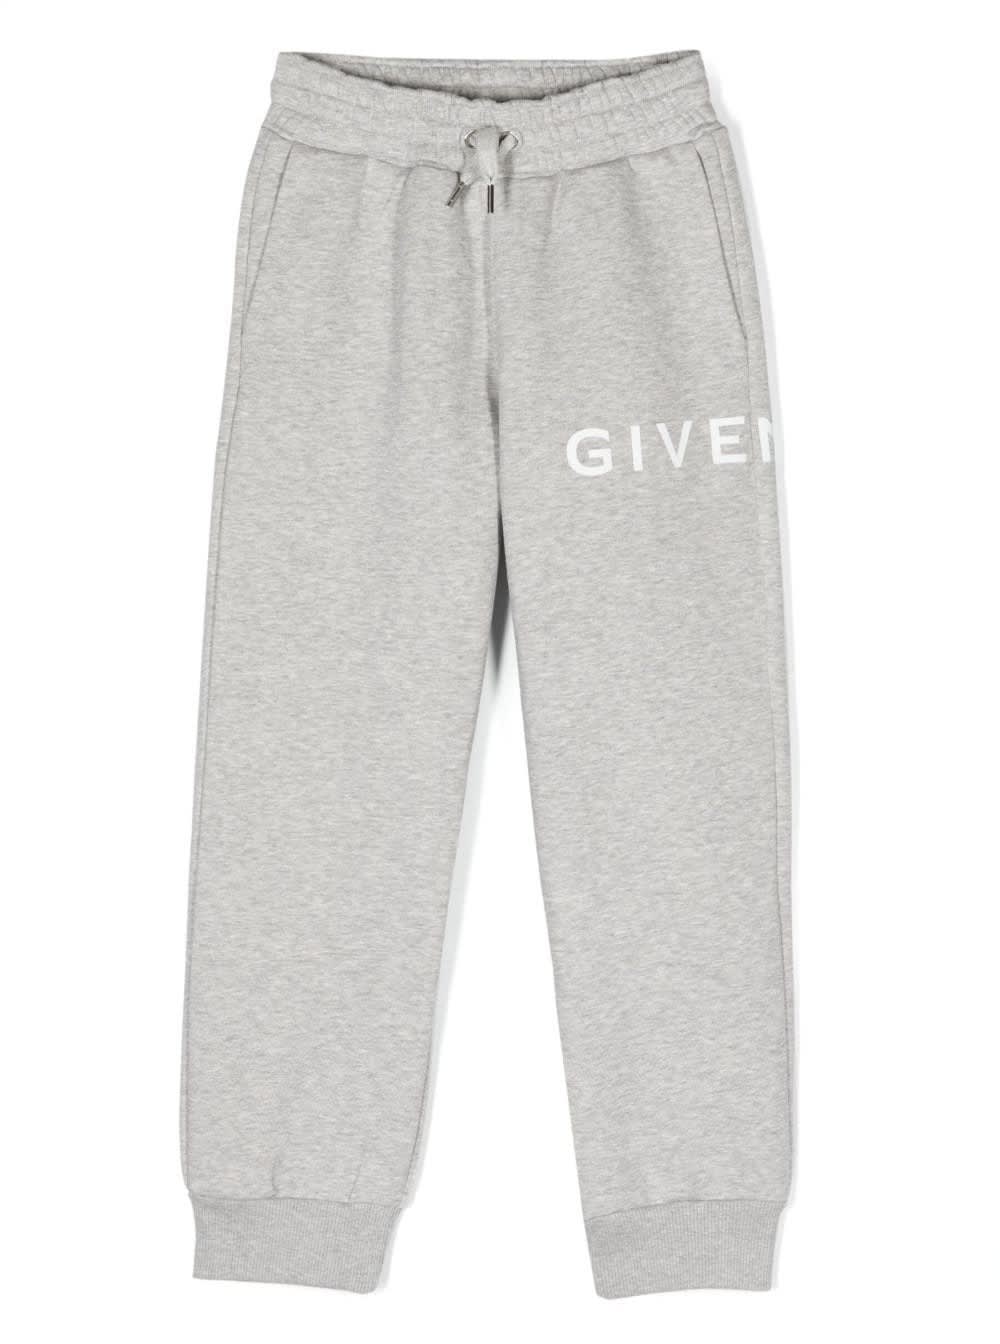 GIVENCHY GREY TRACK PANTS WITHY CONTRASTING LOGO PRINT IN COTTON BOY